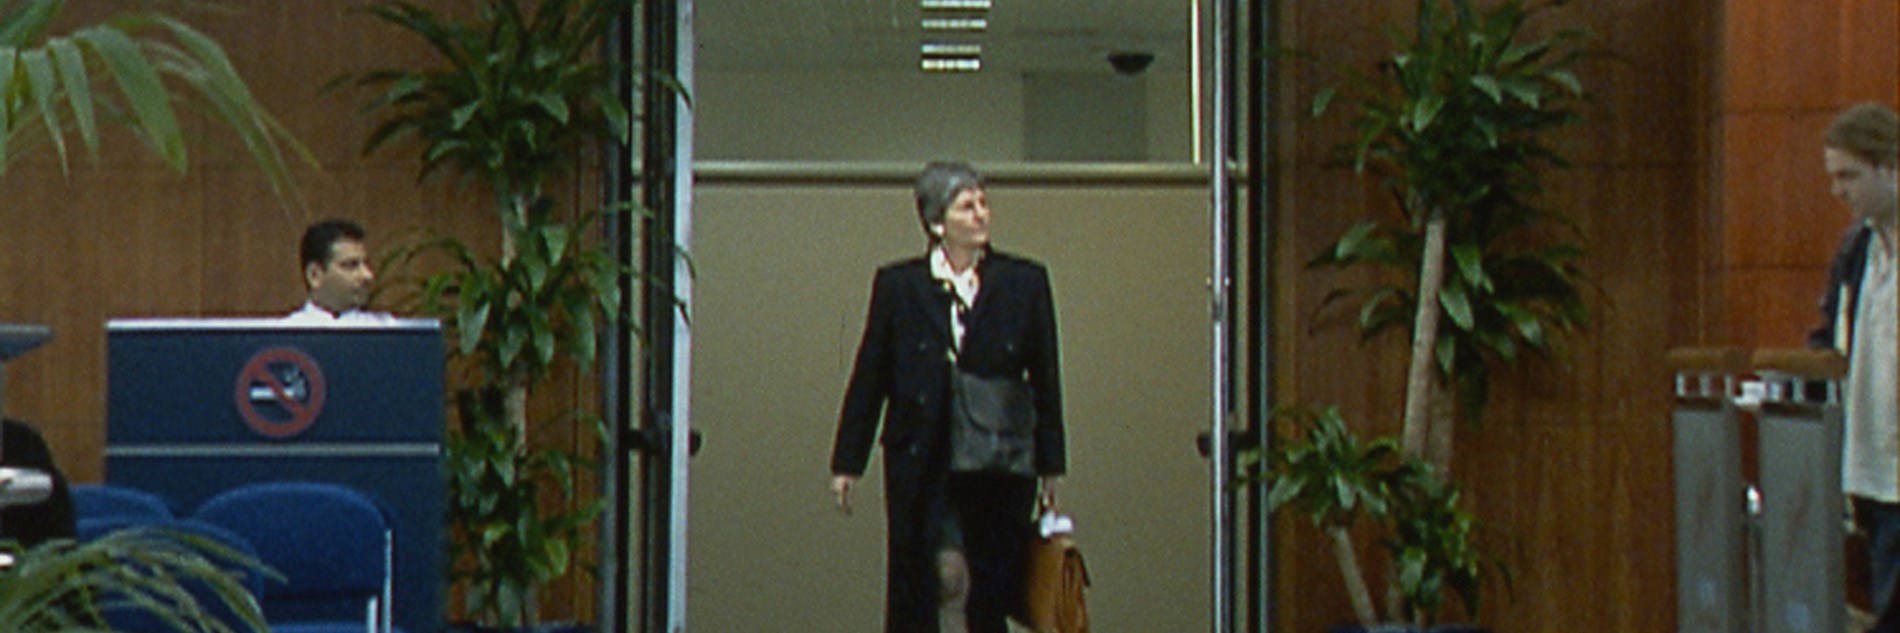 A video still of a smartly dressed person walking through a doorway marked "International Arrivals" at an airport terminal. To the left of the doorway there is a a person is sitting at a desk with a large "No Smoking Sign" on the front of it and chairs in front and to the right of the doorway a person is waiting behind a barrier.  